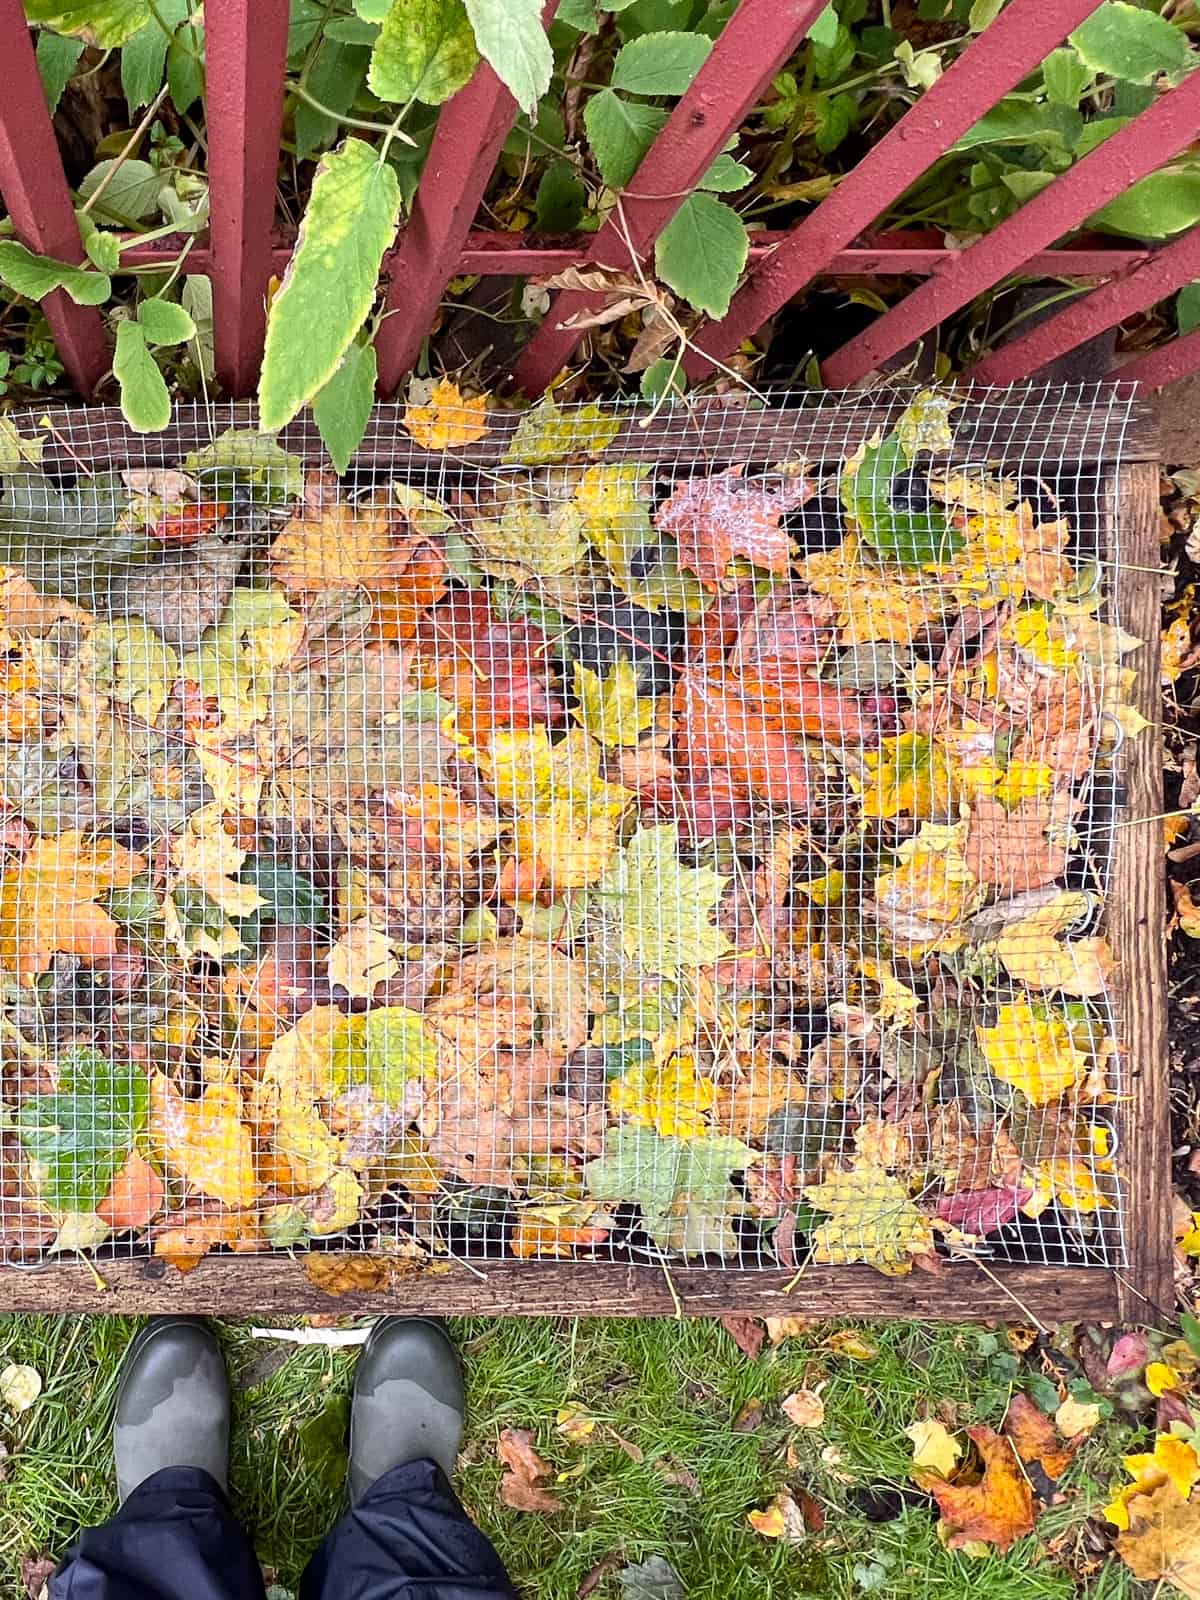 An image of leaves mounded on a raised bed, secured by mesh to keep the leaves in place, part of seasonal garden maintenance.